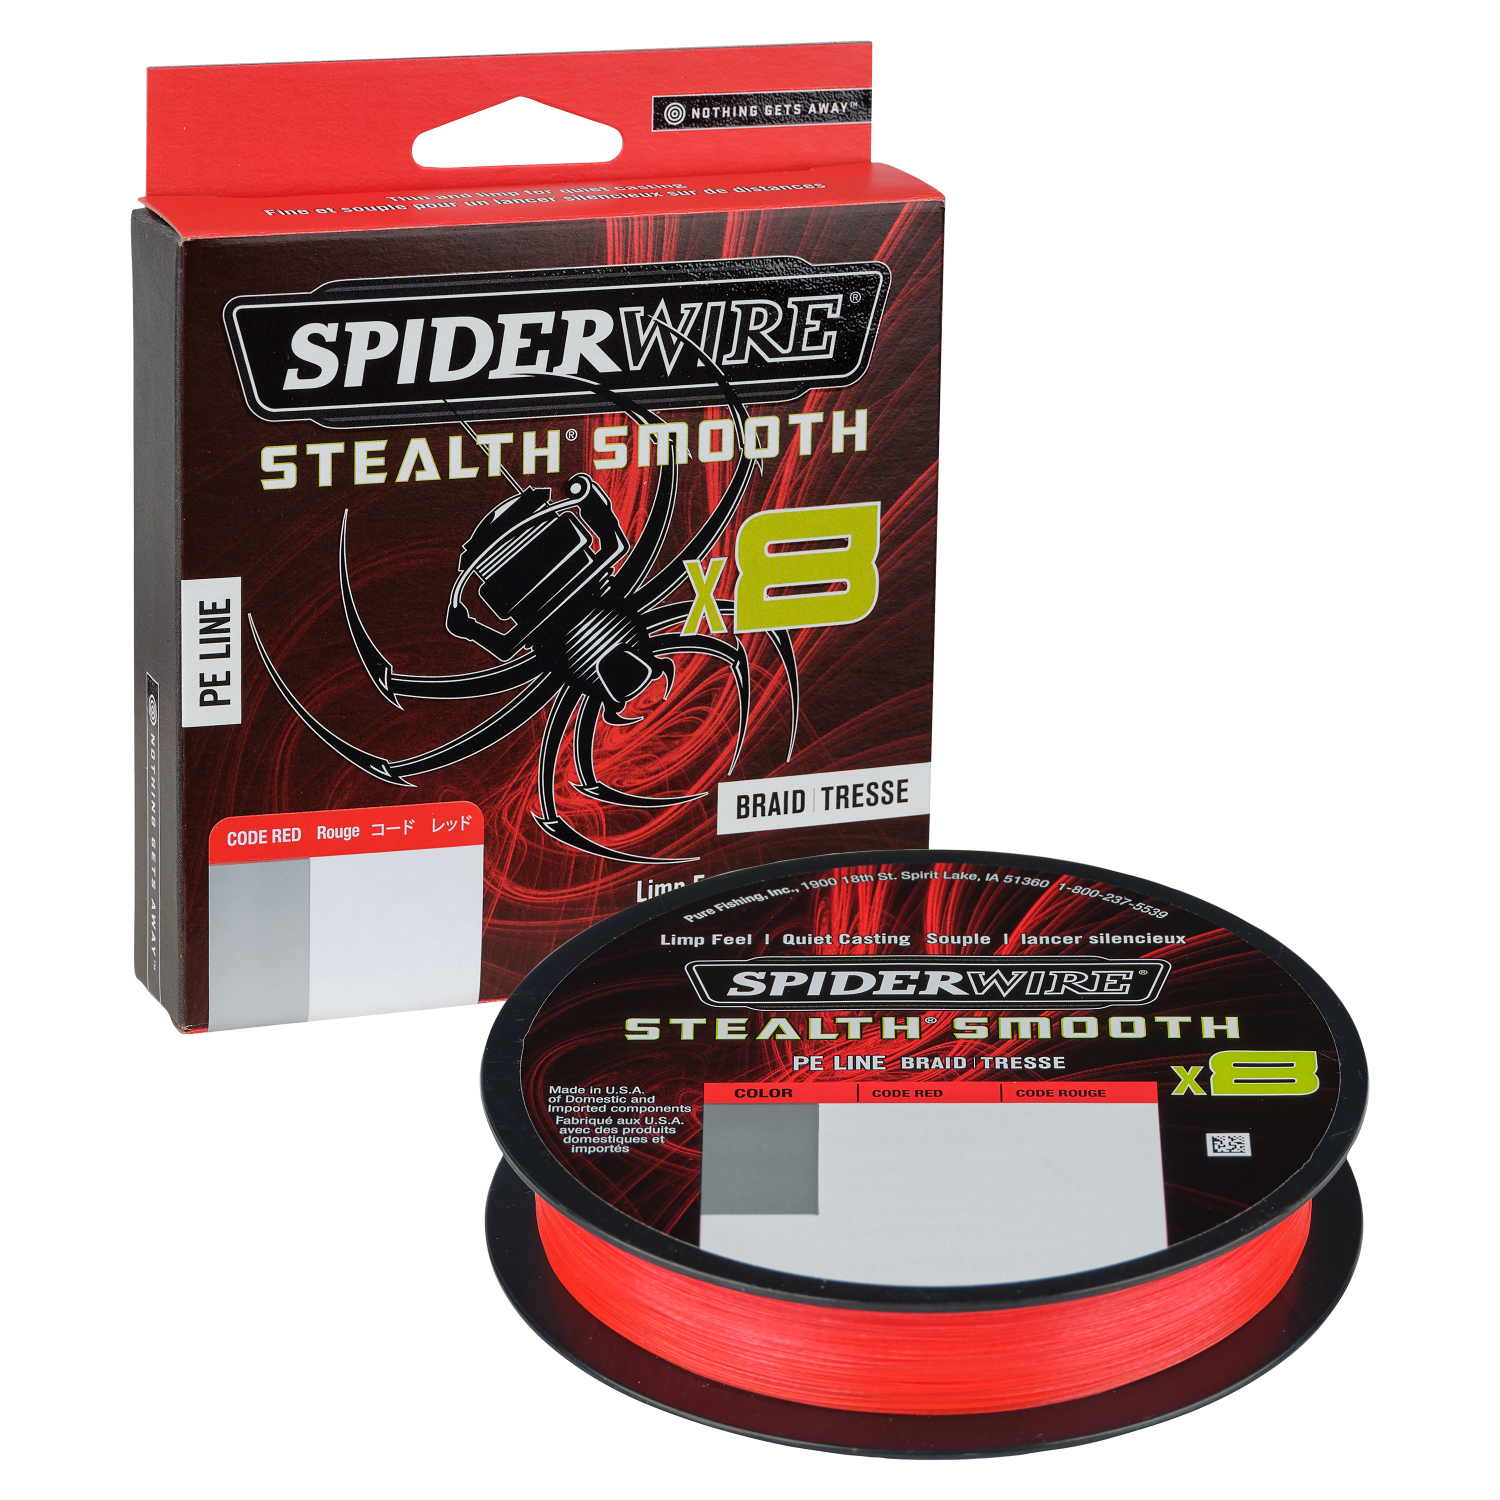 Spiderwire Stealth Smooth 8 